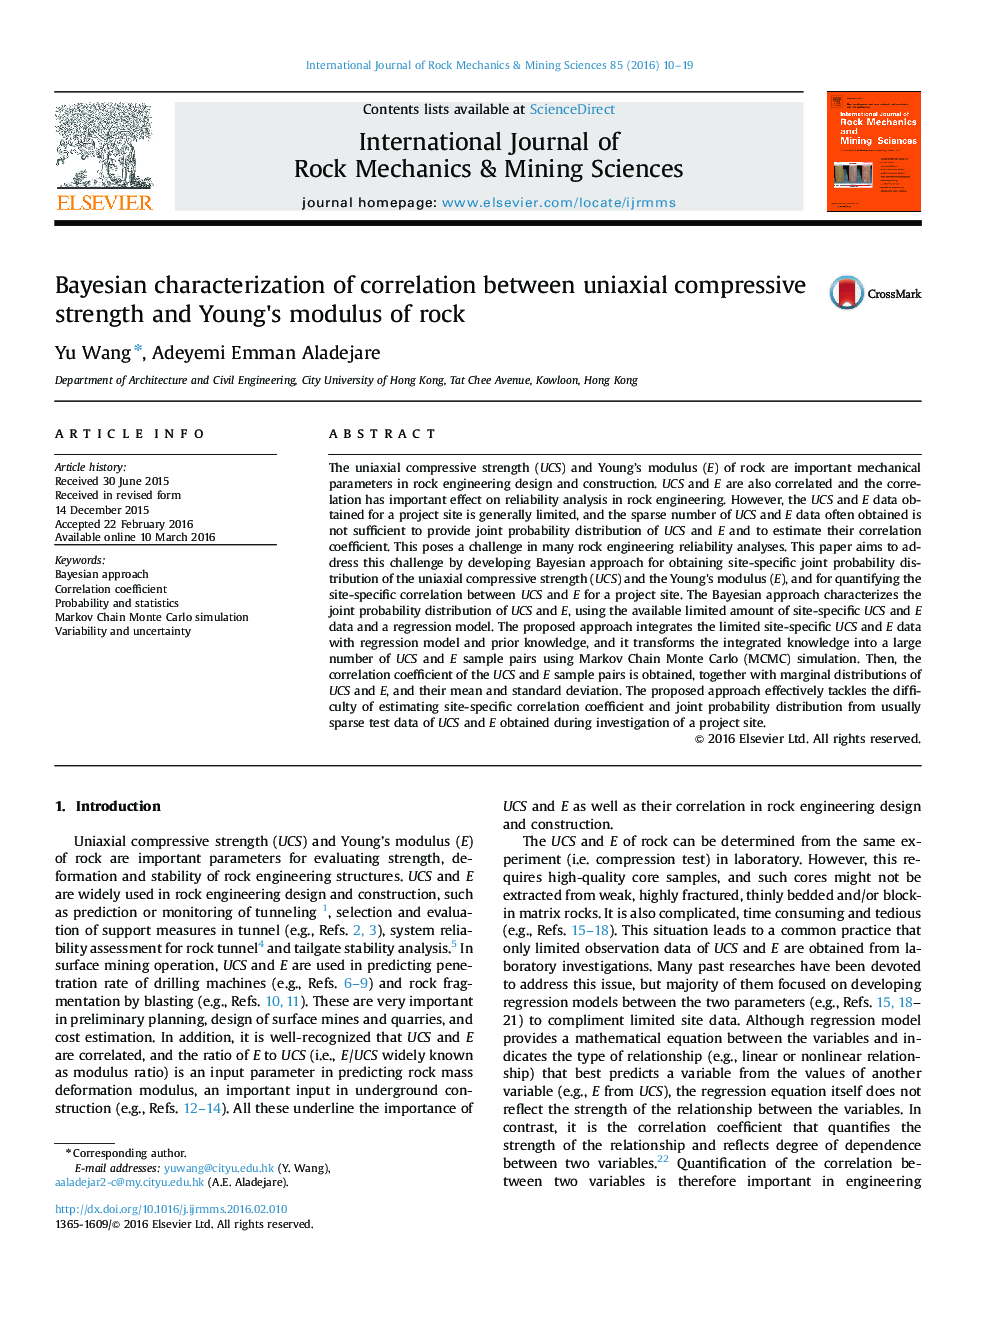 Bayesian characterization of correlation between uniaxial compressive strength and Young's modulus of rock